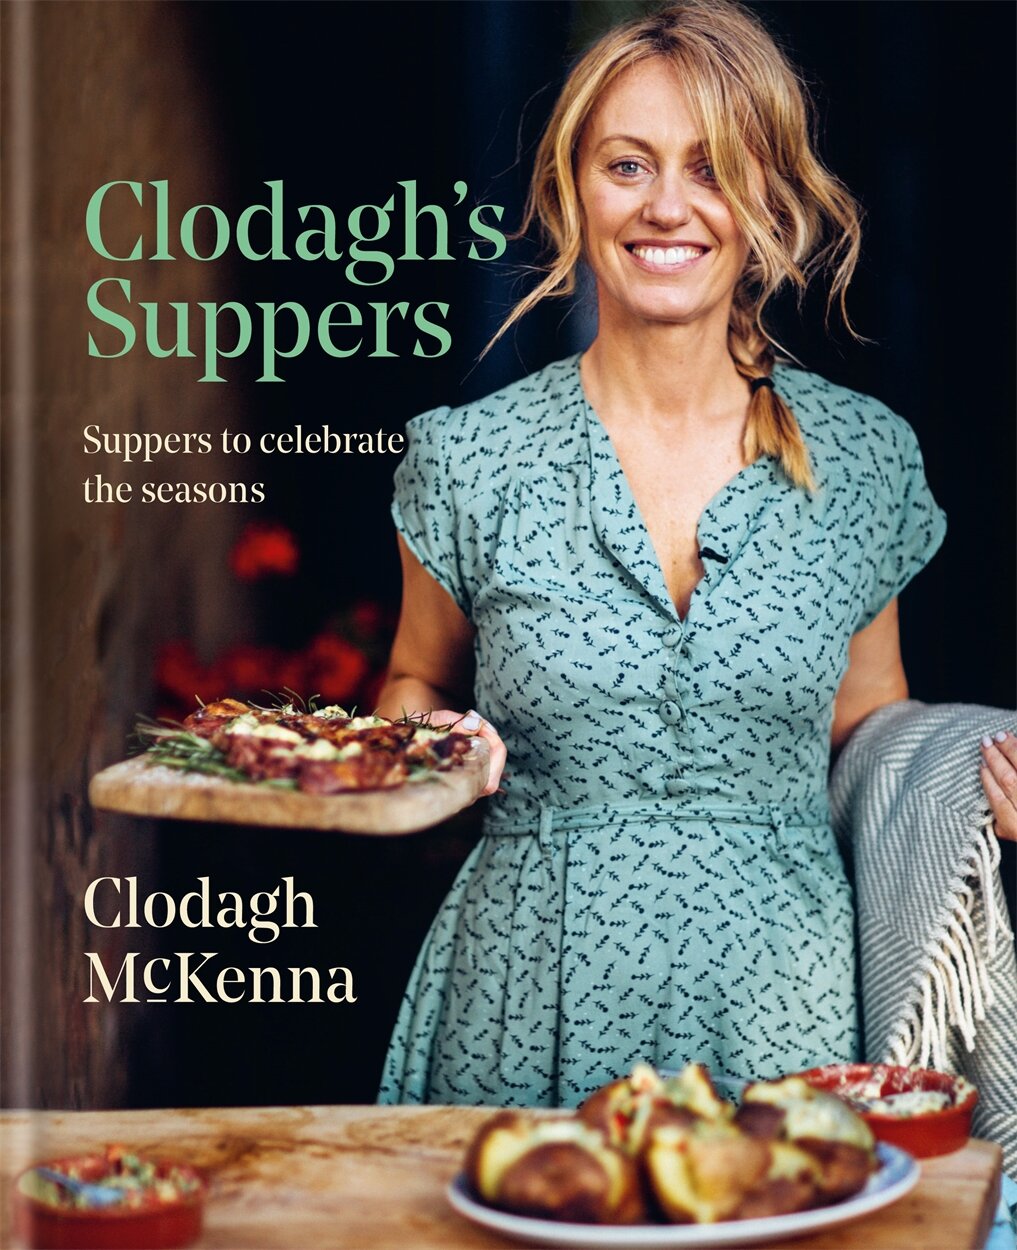 CLODAGH'S SUPPERS BOOK COVER.jpg